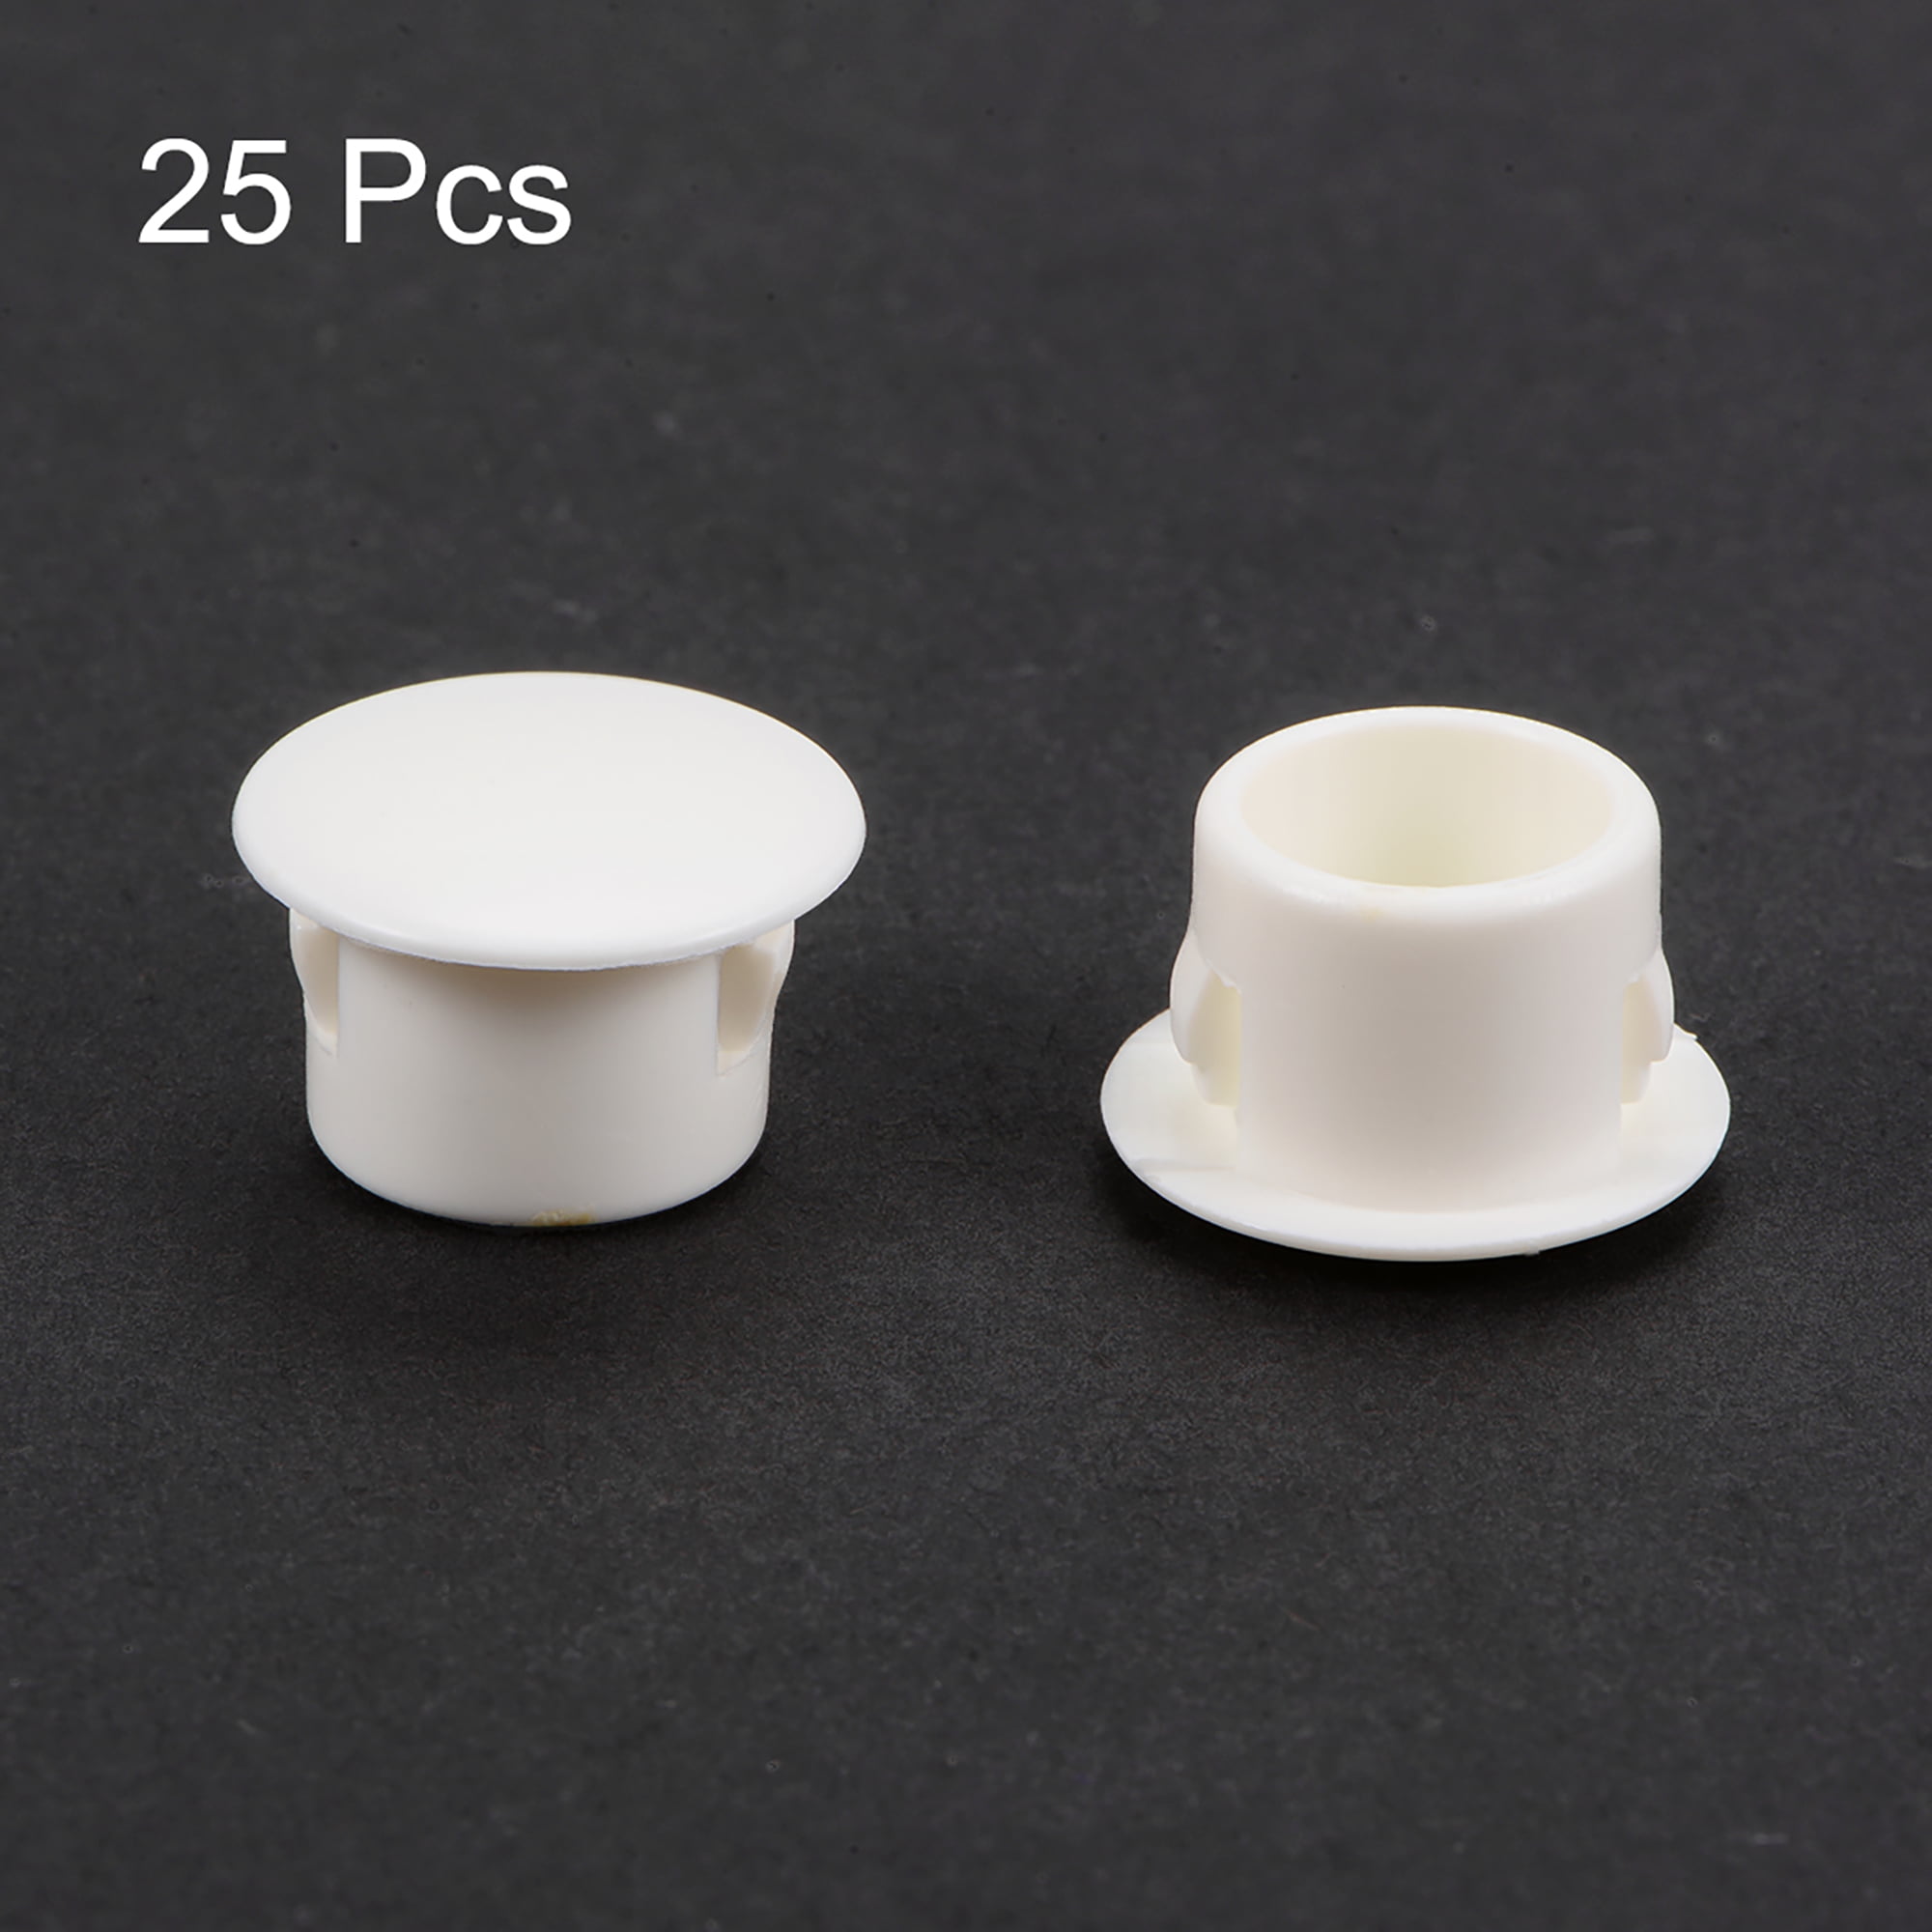 Snap in Locking Hole Tube Fastener Cover Flush Type Panel Plugs 50 Pcs uxcell Hole Plugs White Plastic 13mm 1/2-inch